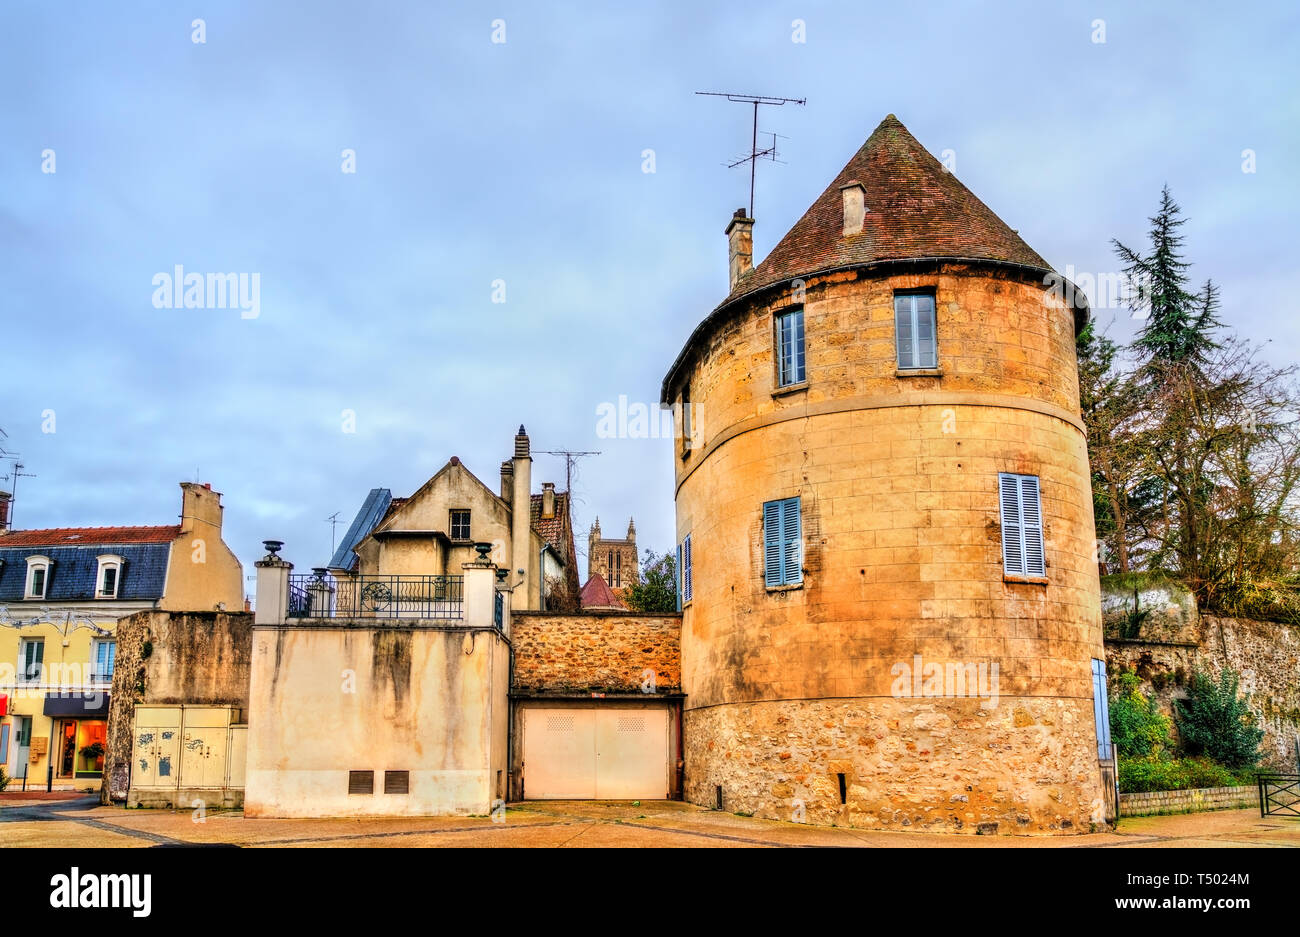 City walls of Meaux in Paris region of France Stock Photo